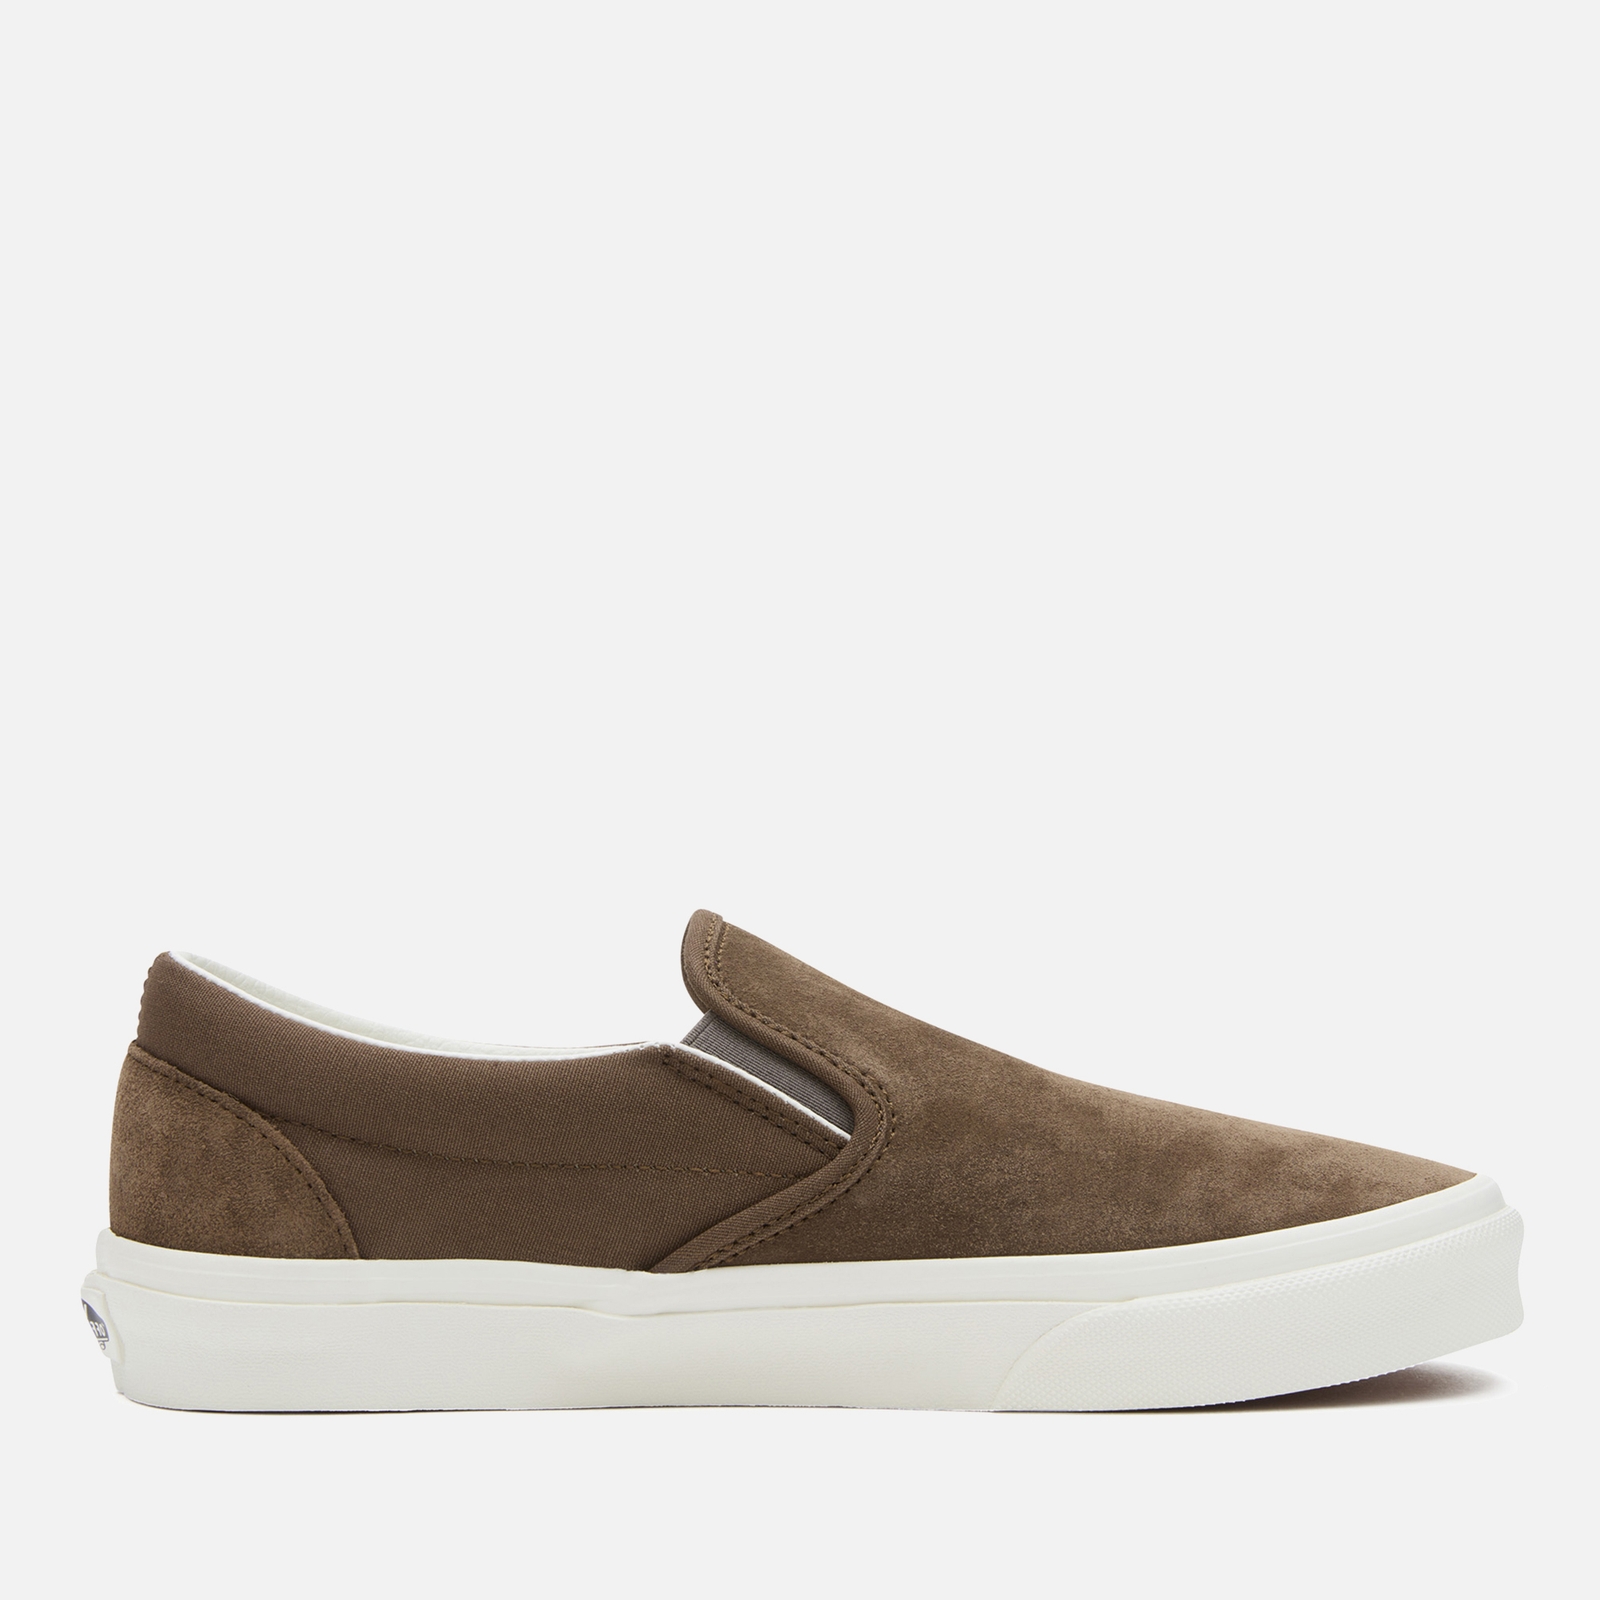 Vans Men’s Classic Suede and Canvas Slip On Trainers